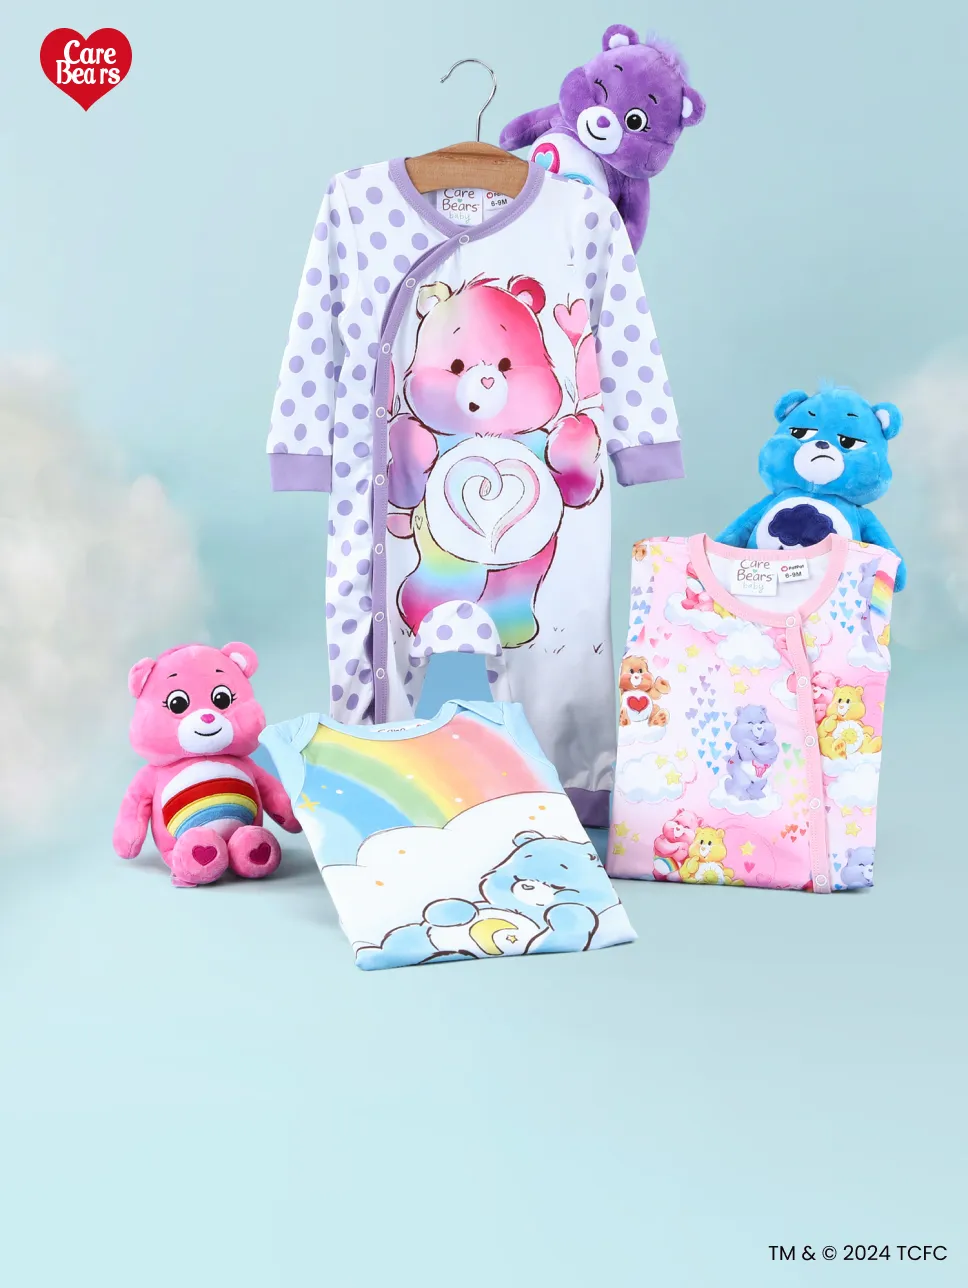 Click it to join Cuddle Up with Care Bears Baby Collection activity